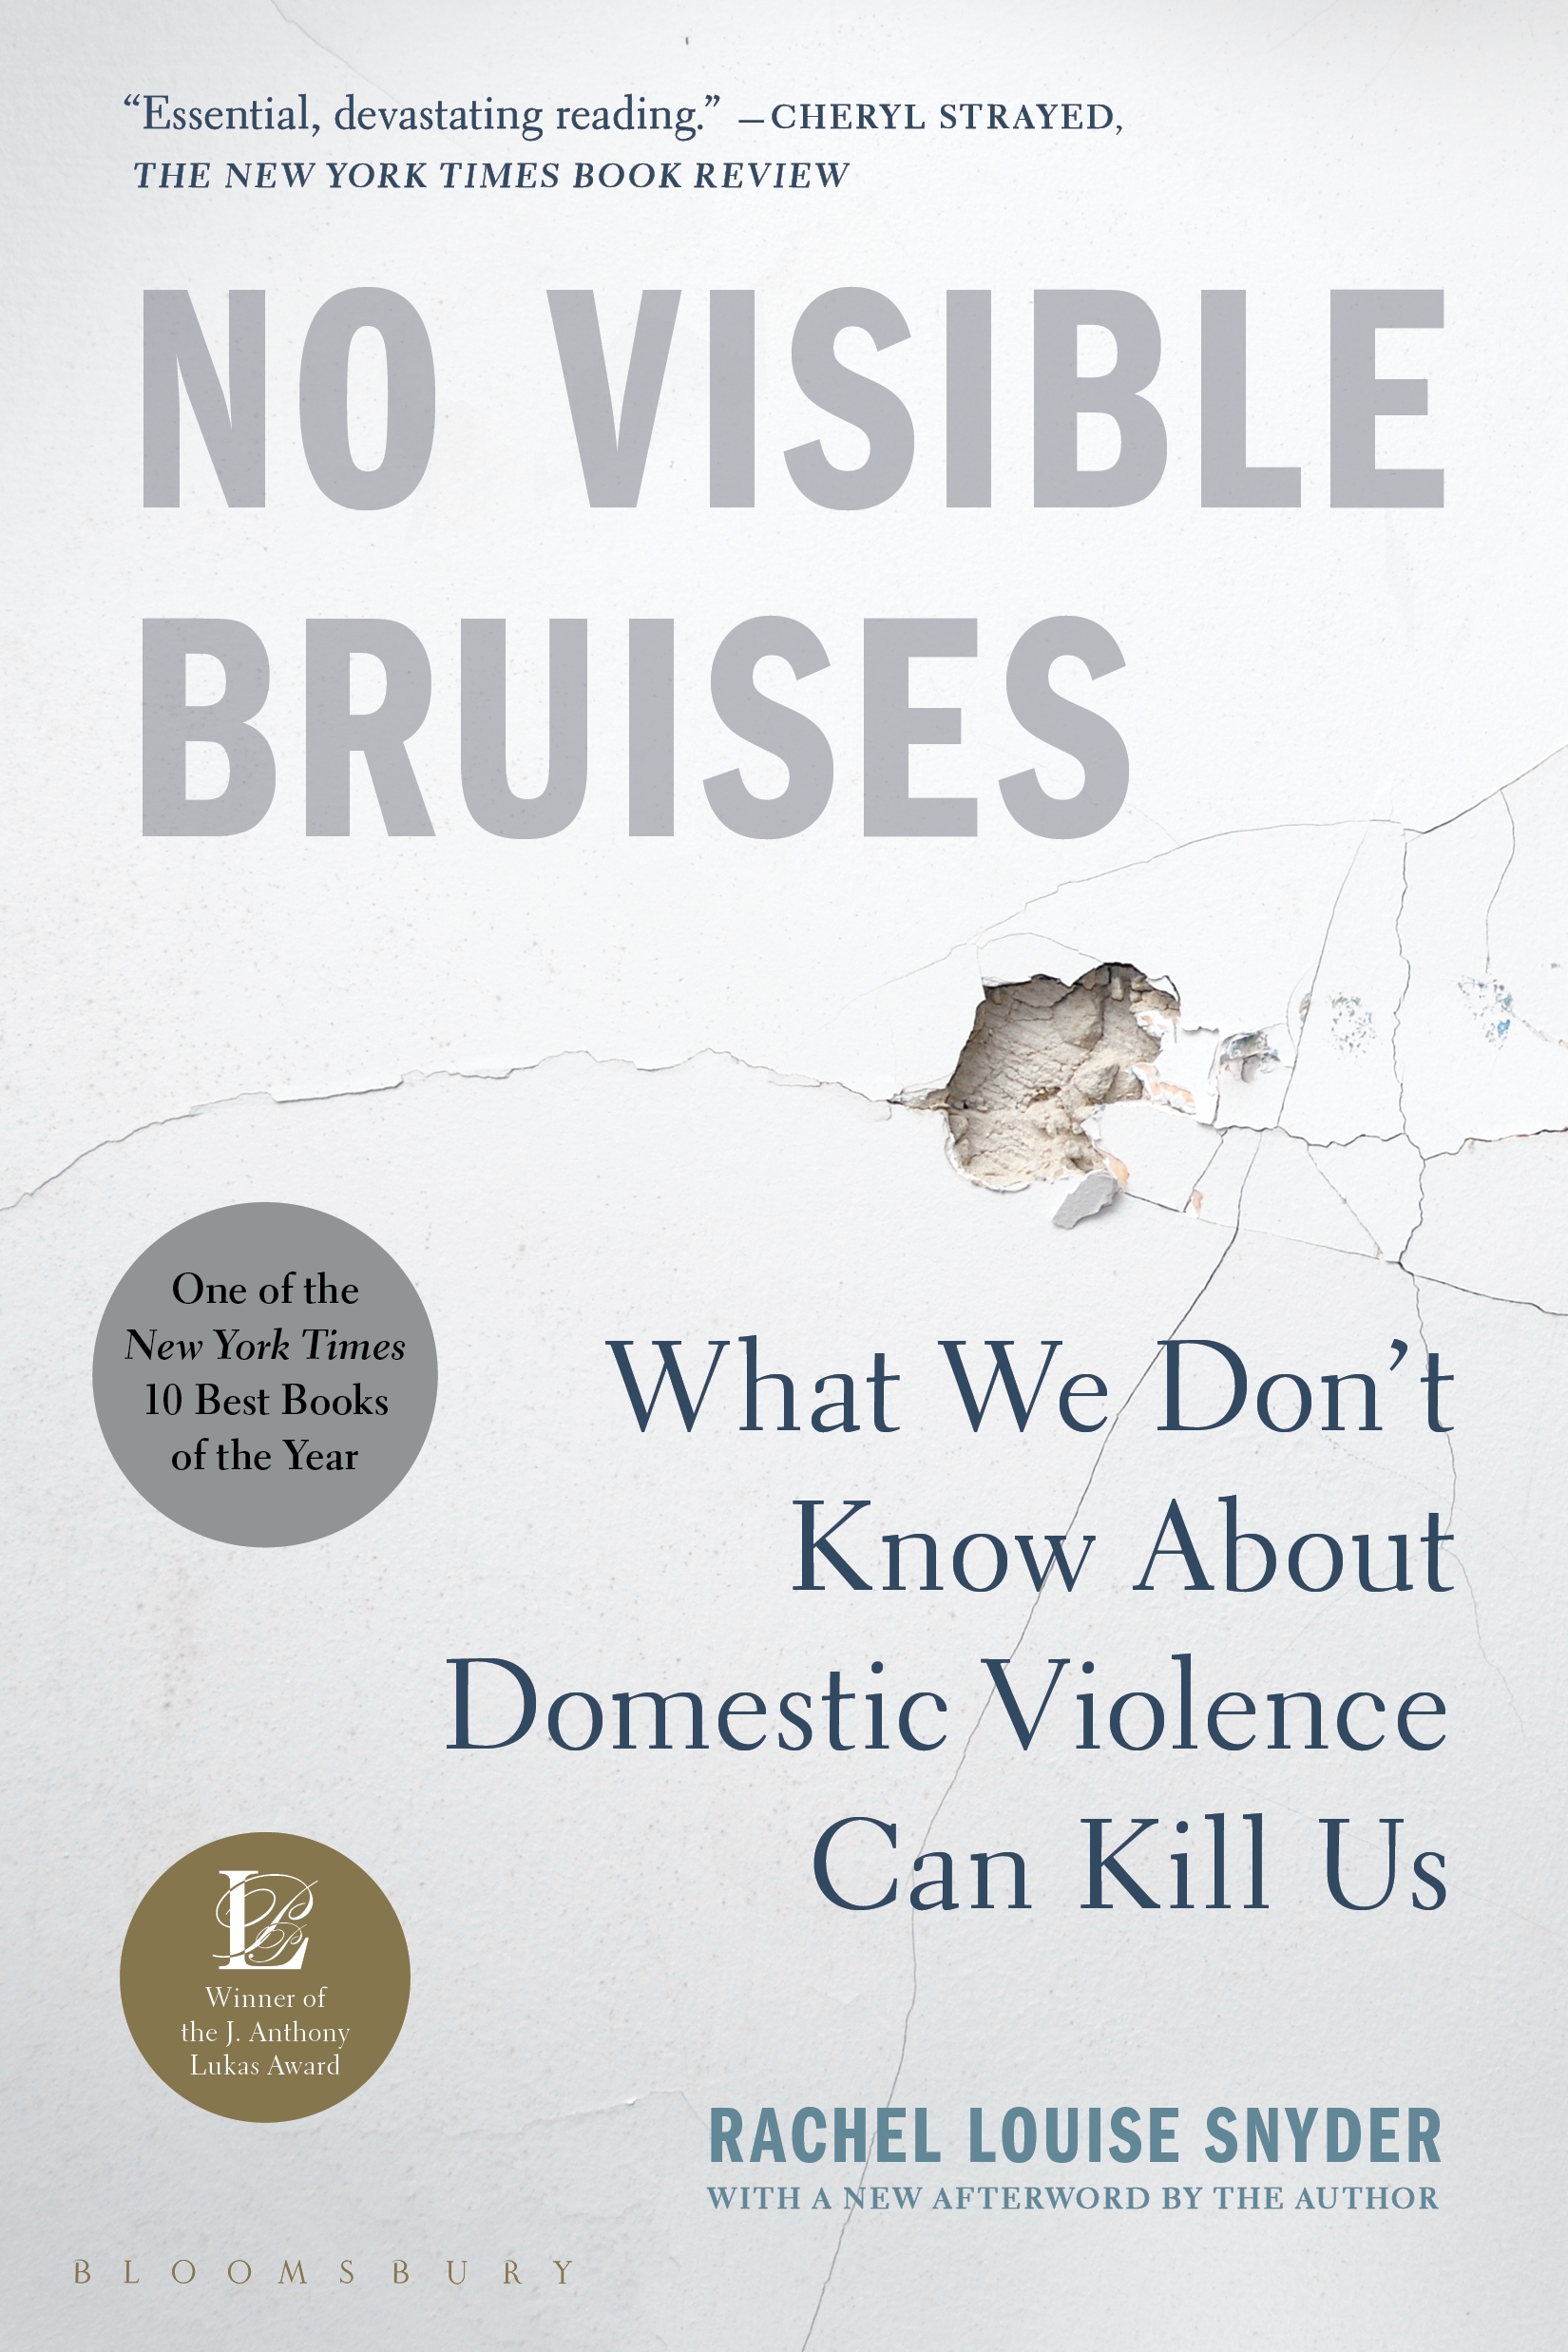 Image de couverture de No Visible Bruises [electronic resource] : What We Don’t Know About Domestic Violence Can Kill Us